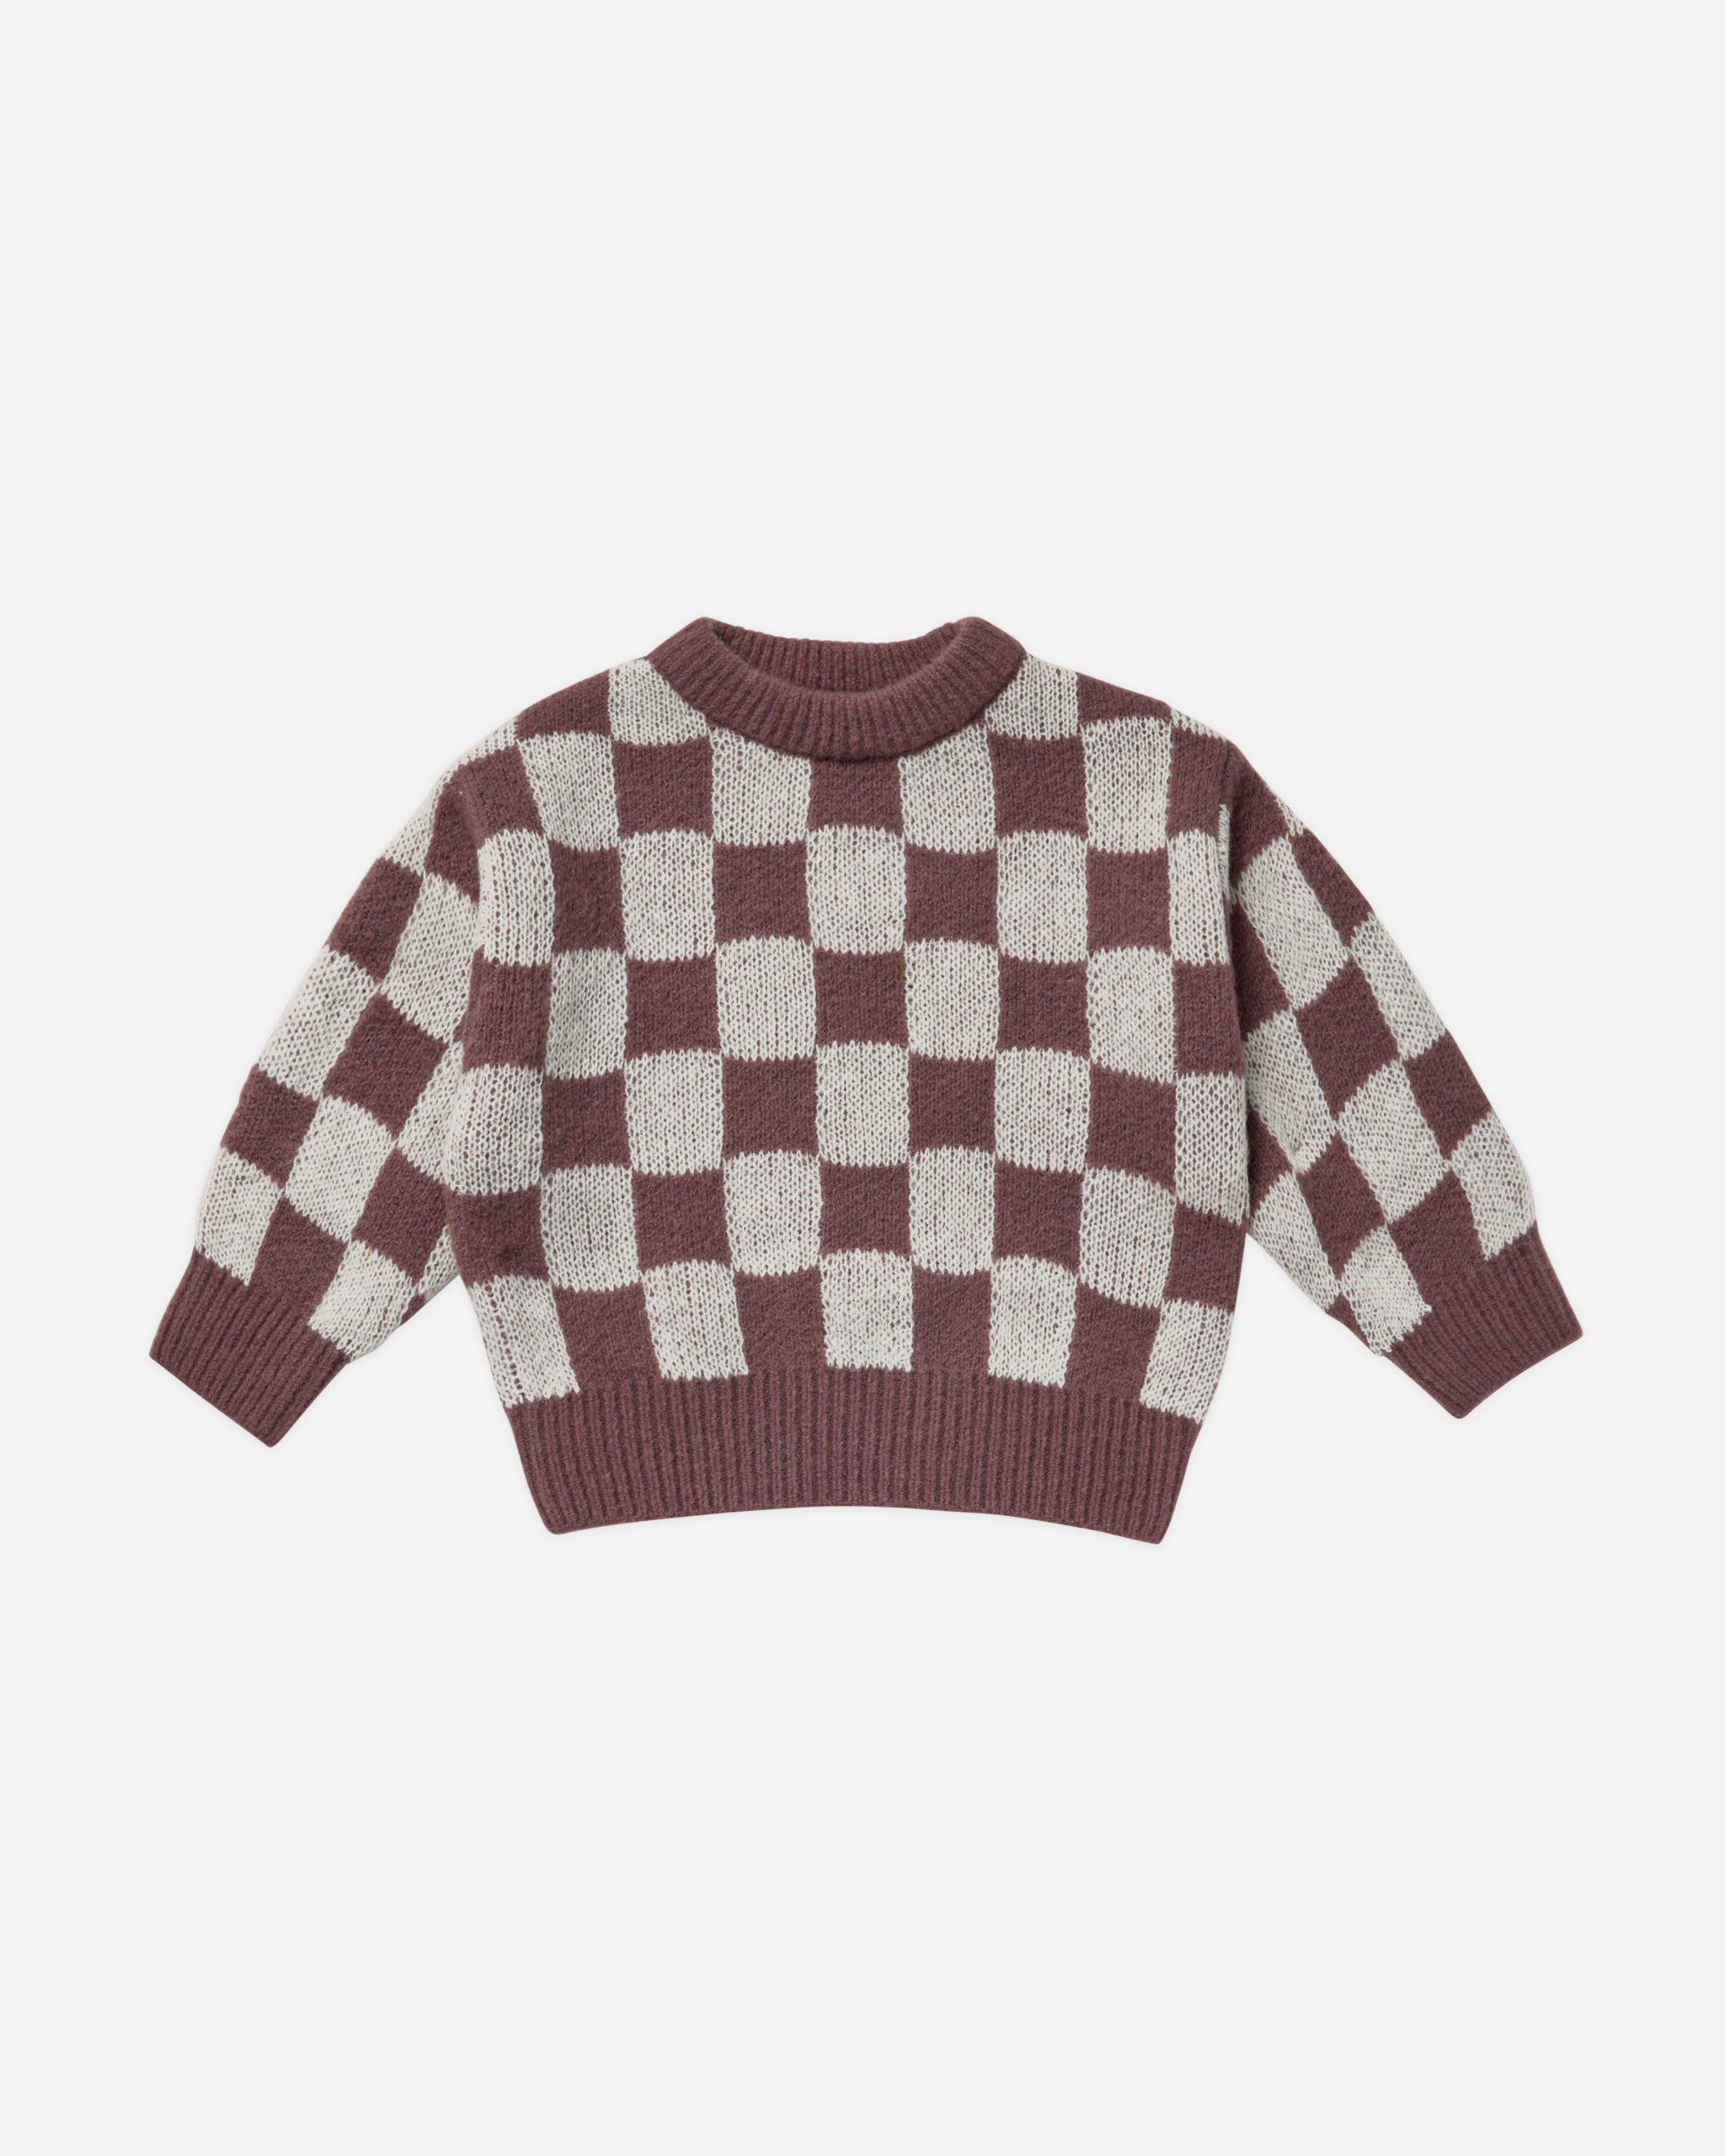 Knit Pullover || Plum Checker - Rylee + Cru | Kids Clothes | Trendy Baby Clothes | Modern Infant Outfits |